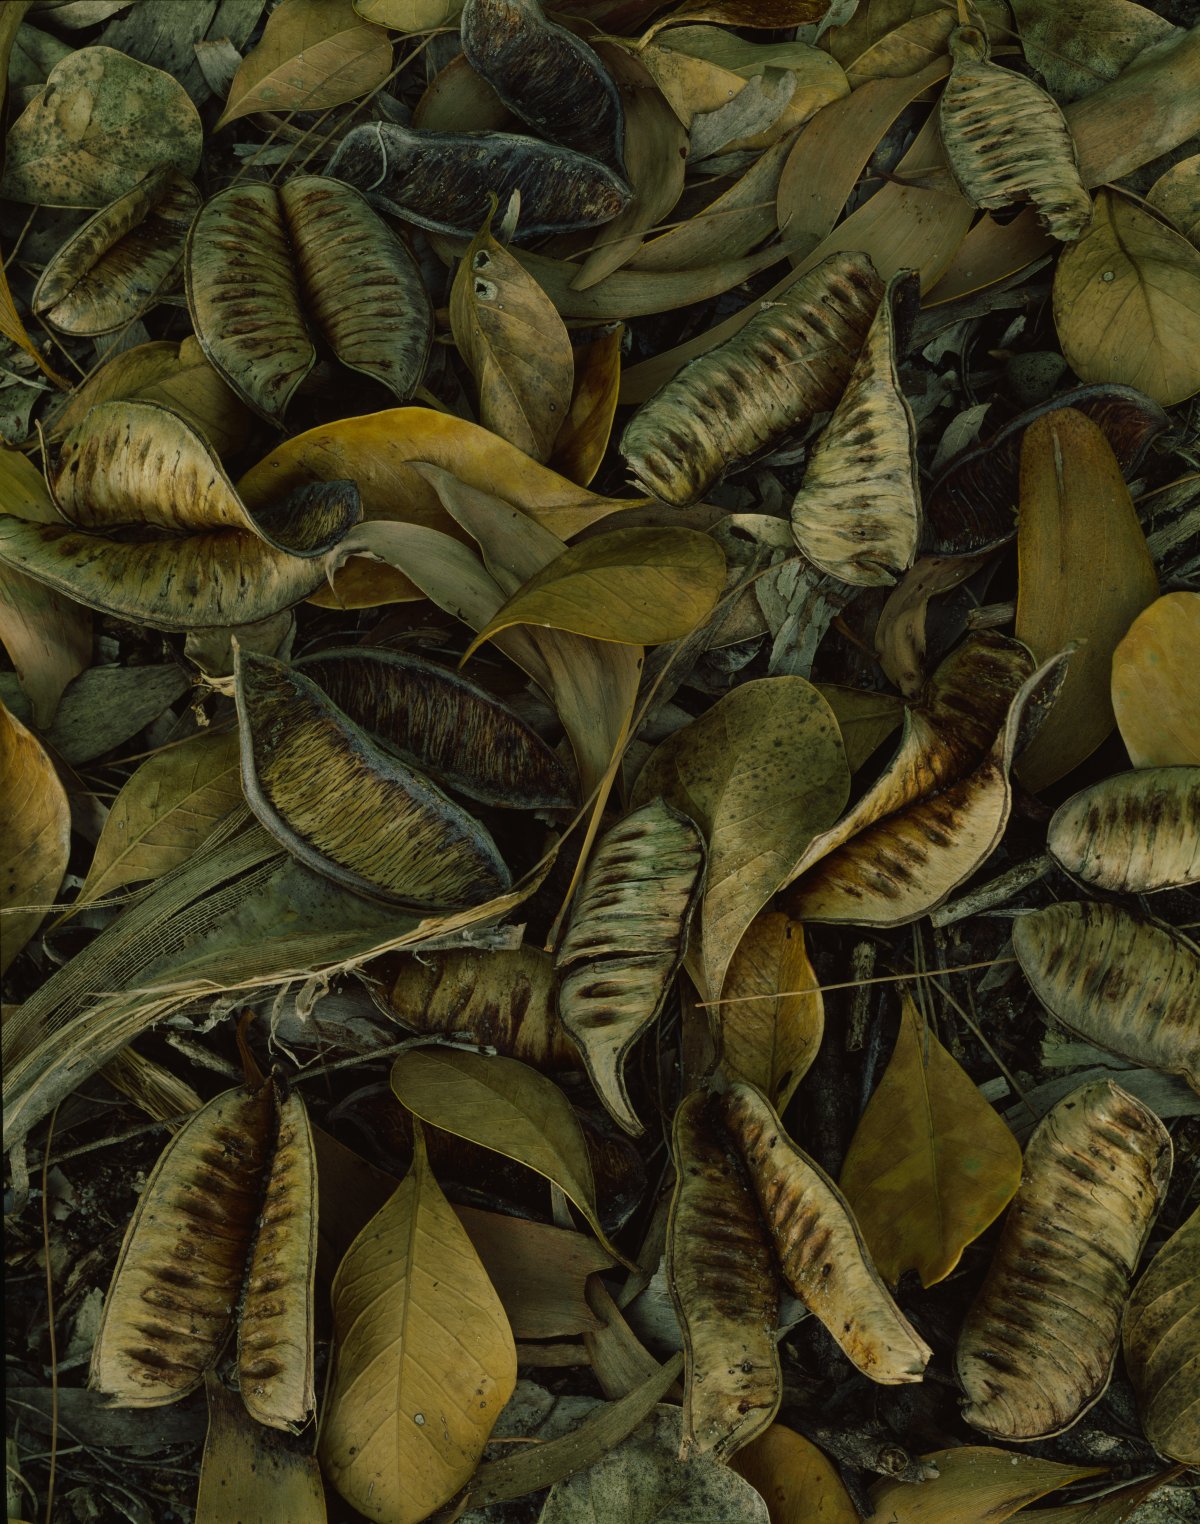 An image full of dried brown and cream coloured husks of seedpods and leaves.